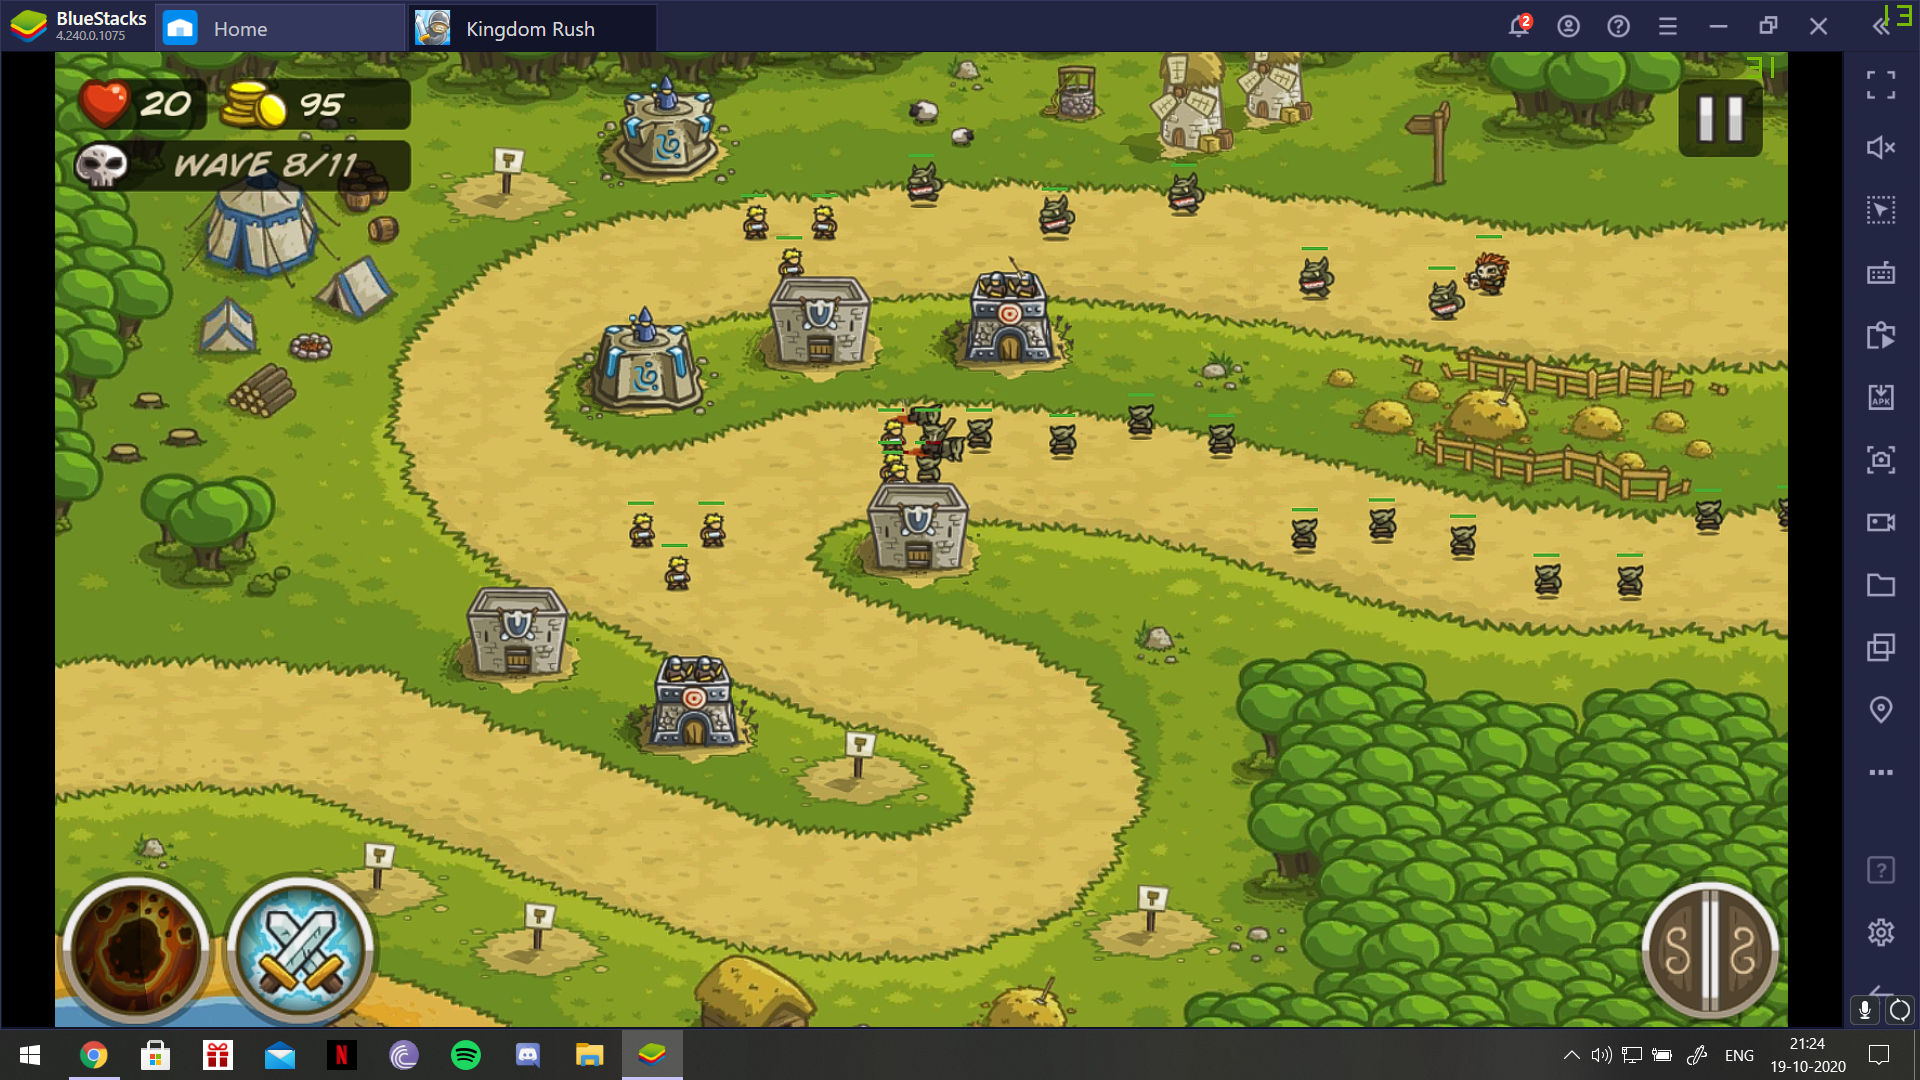 How to Play Kingdom Rush on PC with BlueStacks